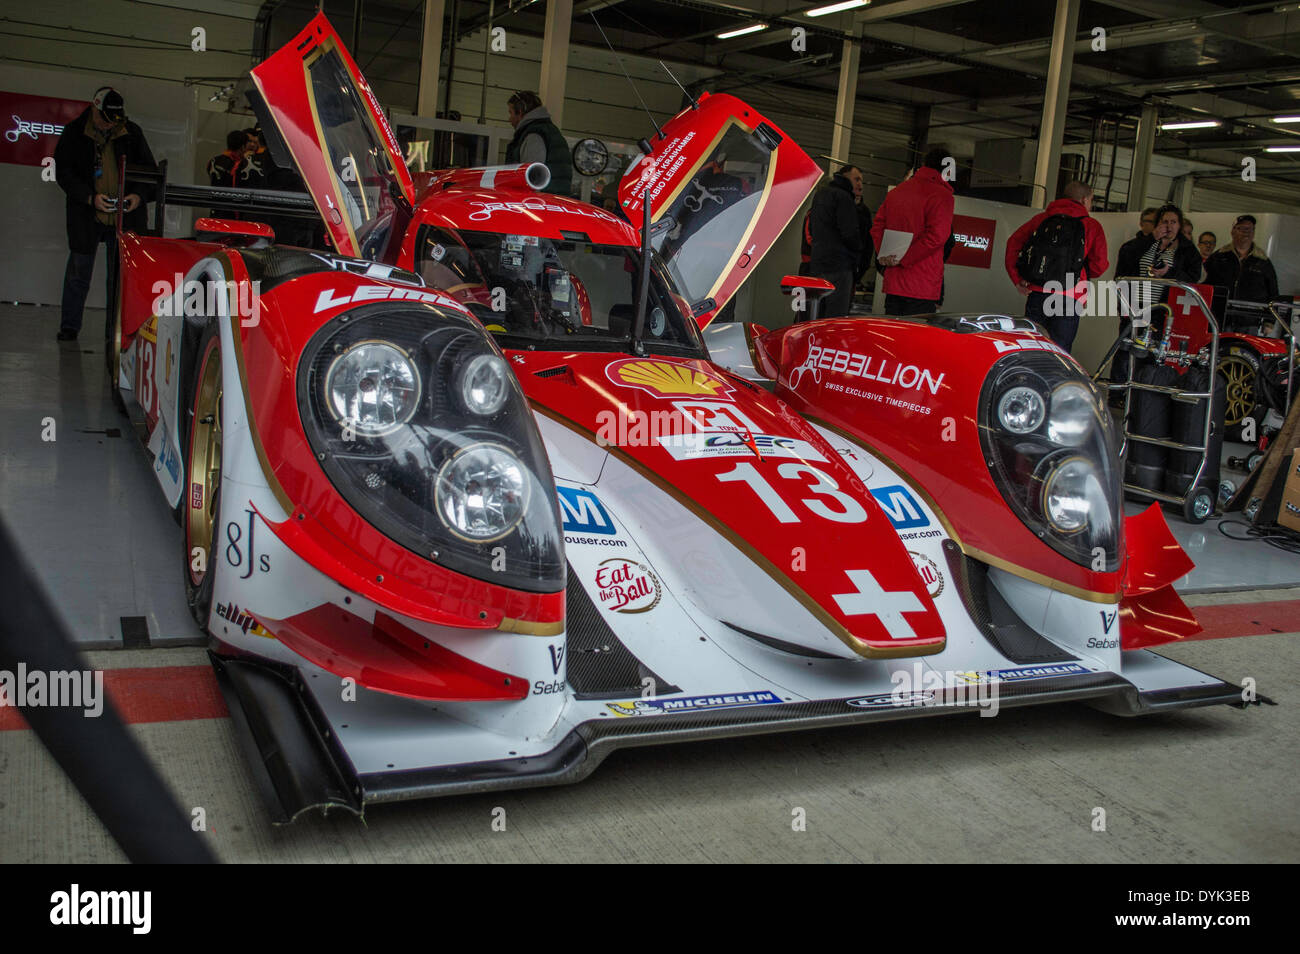 Towcester, UK. 20th Apr, 2014. The #13Lola B12/60 – Toyota driven by DOMINIK KRAIHAMER, ANDREA BELICCHI and FABIO LEMER during the 6 hours of Silverstone 2014 at Silverstone Circuit in Towcester, United Kingdom. Credit:  Gergo Toth/Alamy Live News Stock Photo